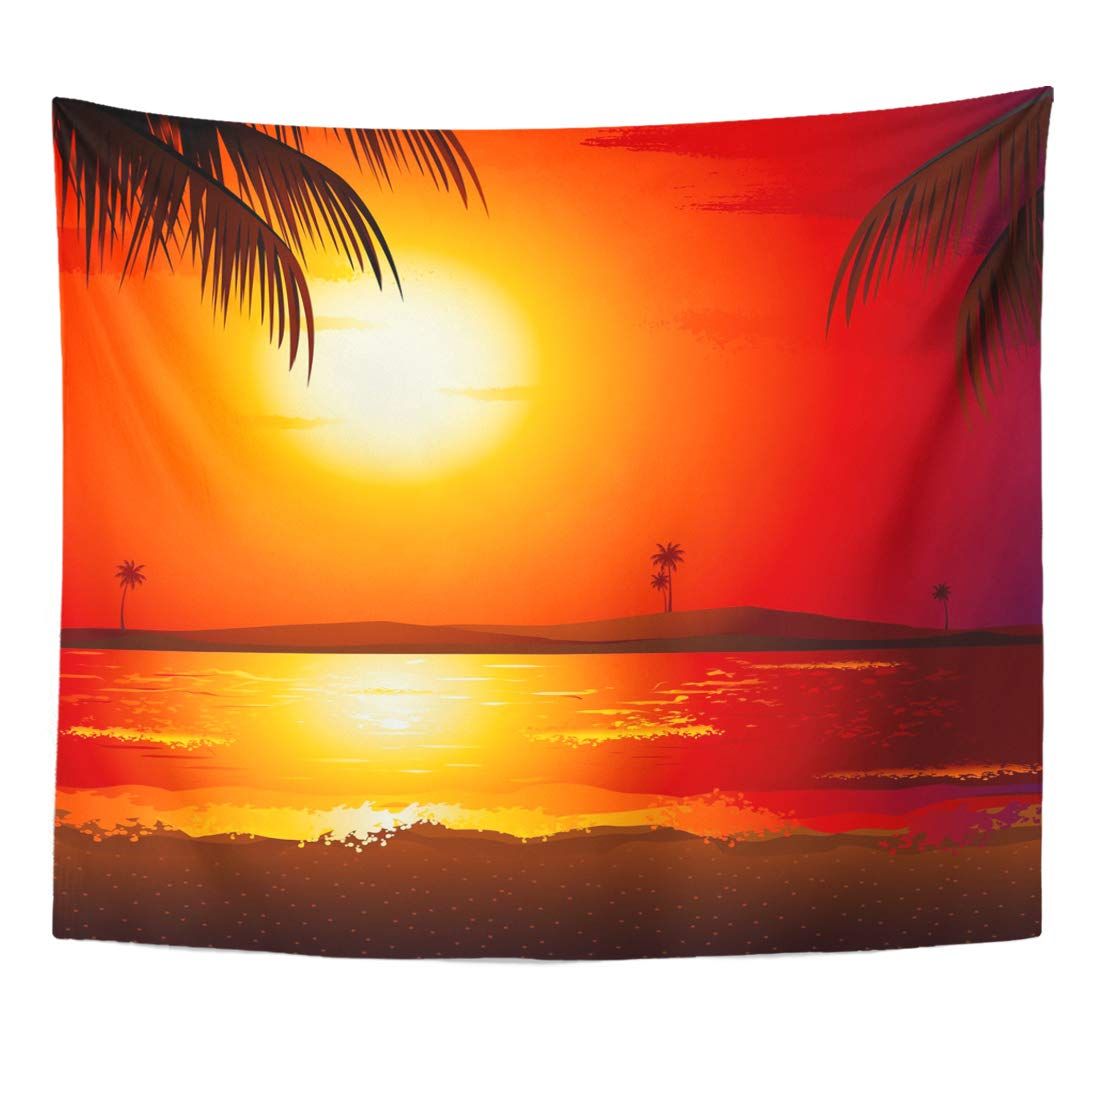 Zealgned Evening Tropical Sunset View In Beach With Palm Tree Sea Scene  Scenery Wall Art Hanging Tapestry Home Decor For Living Room Bedroom Dorm  60x80 Inch – Walmart – Walmart In Best And Newest Tropical Evening Wall Art (View 13 of 20)